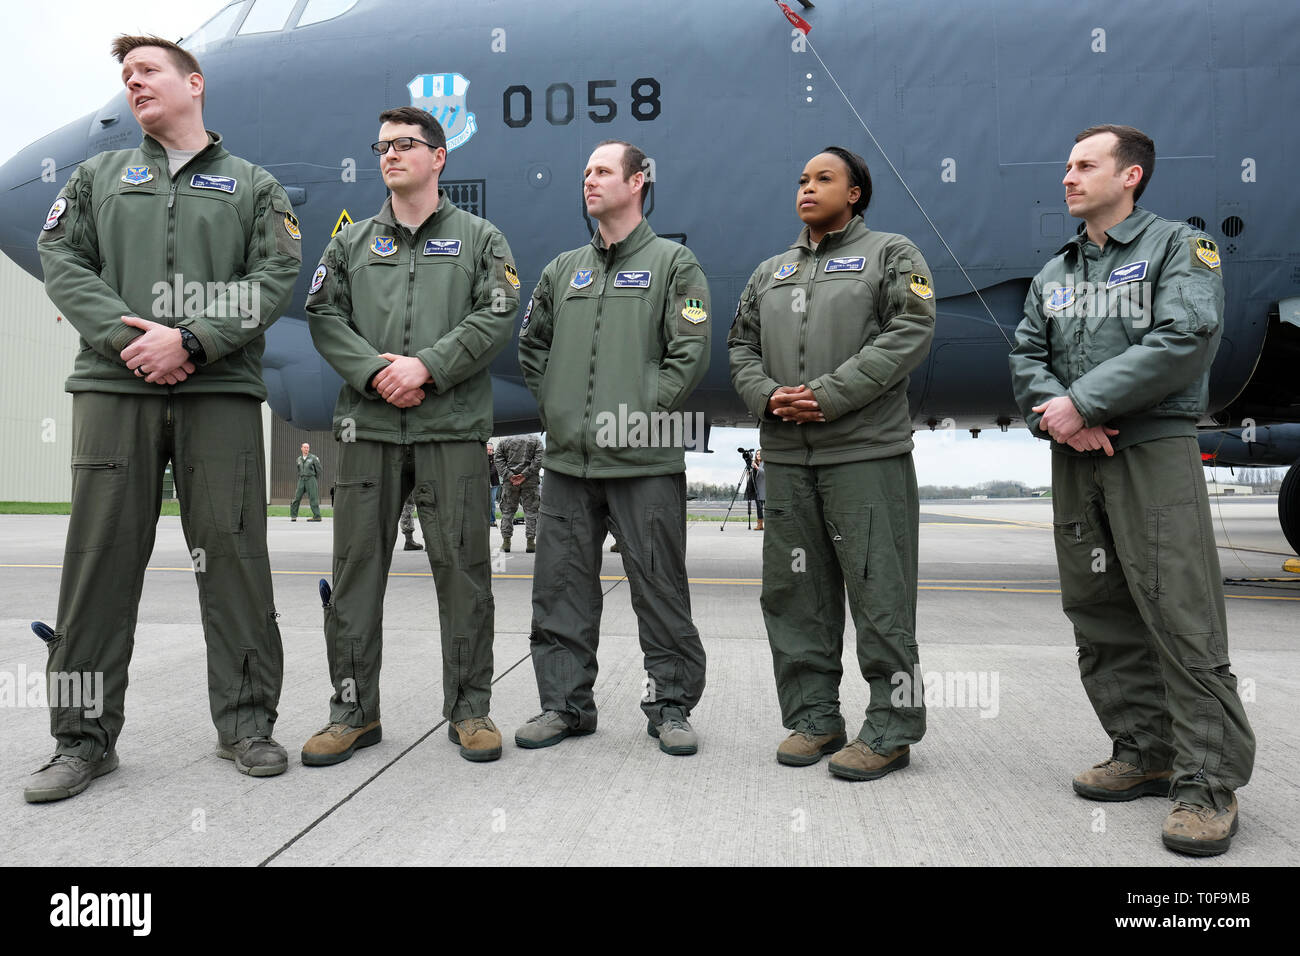 RAF Fairford, Gloucestershire, UK. 19th March 2019. Flight crew from the USAF 2nd Bomb Wing stand in front of a B-52H Stratofortress bomber as RAF Fairford welcomes a Bomber Task Force deployment of six Boeing B-52H Stratofortress aircraft to RAF Fairford from the 2nd Bomb Wing in Louisiana, USA - the largest deployment of B-52s to the UK since Operation Iraqi Freedom in 2003. The aircraft will perform training sorties over The Baltic, Central Europe and the Eastern Mediterranean. Credit: Steven May/Alamy Live News Stock Photo